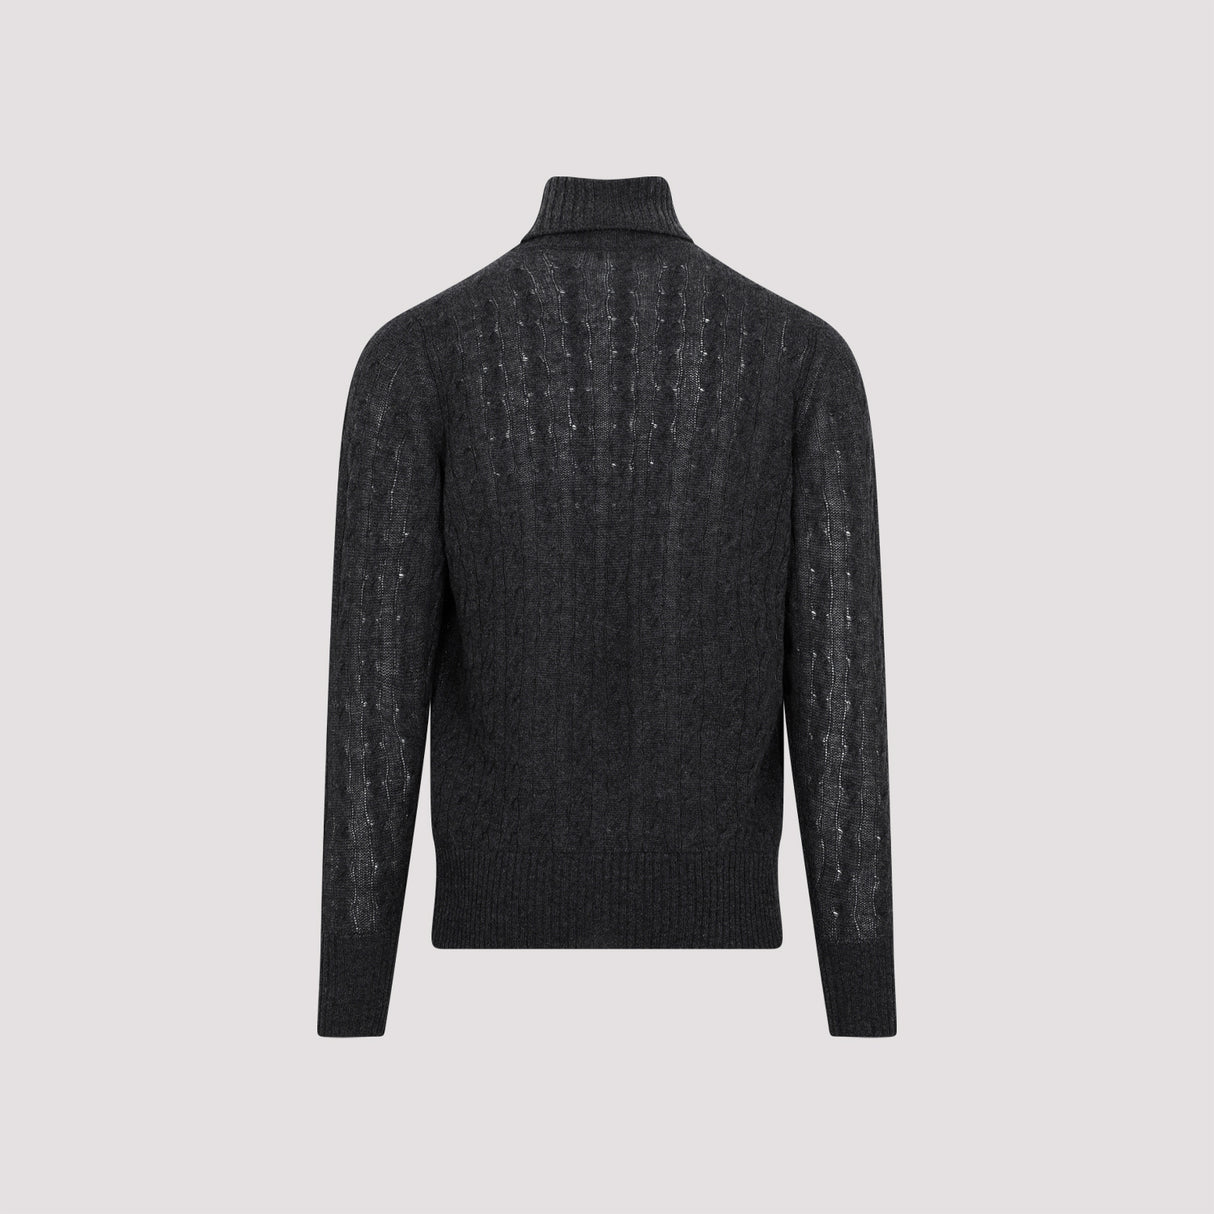 ETRO Grey Cable-Knit Cashmere Sweater for Men